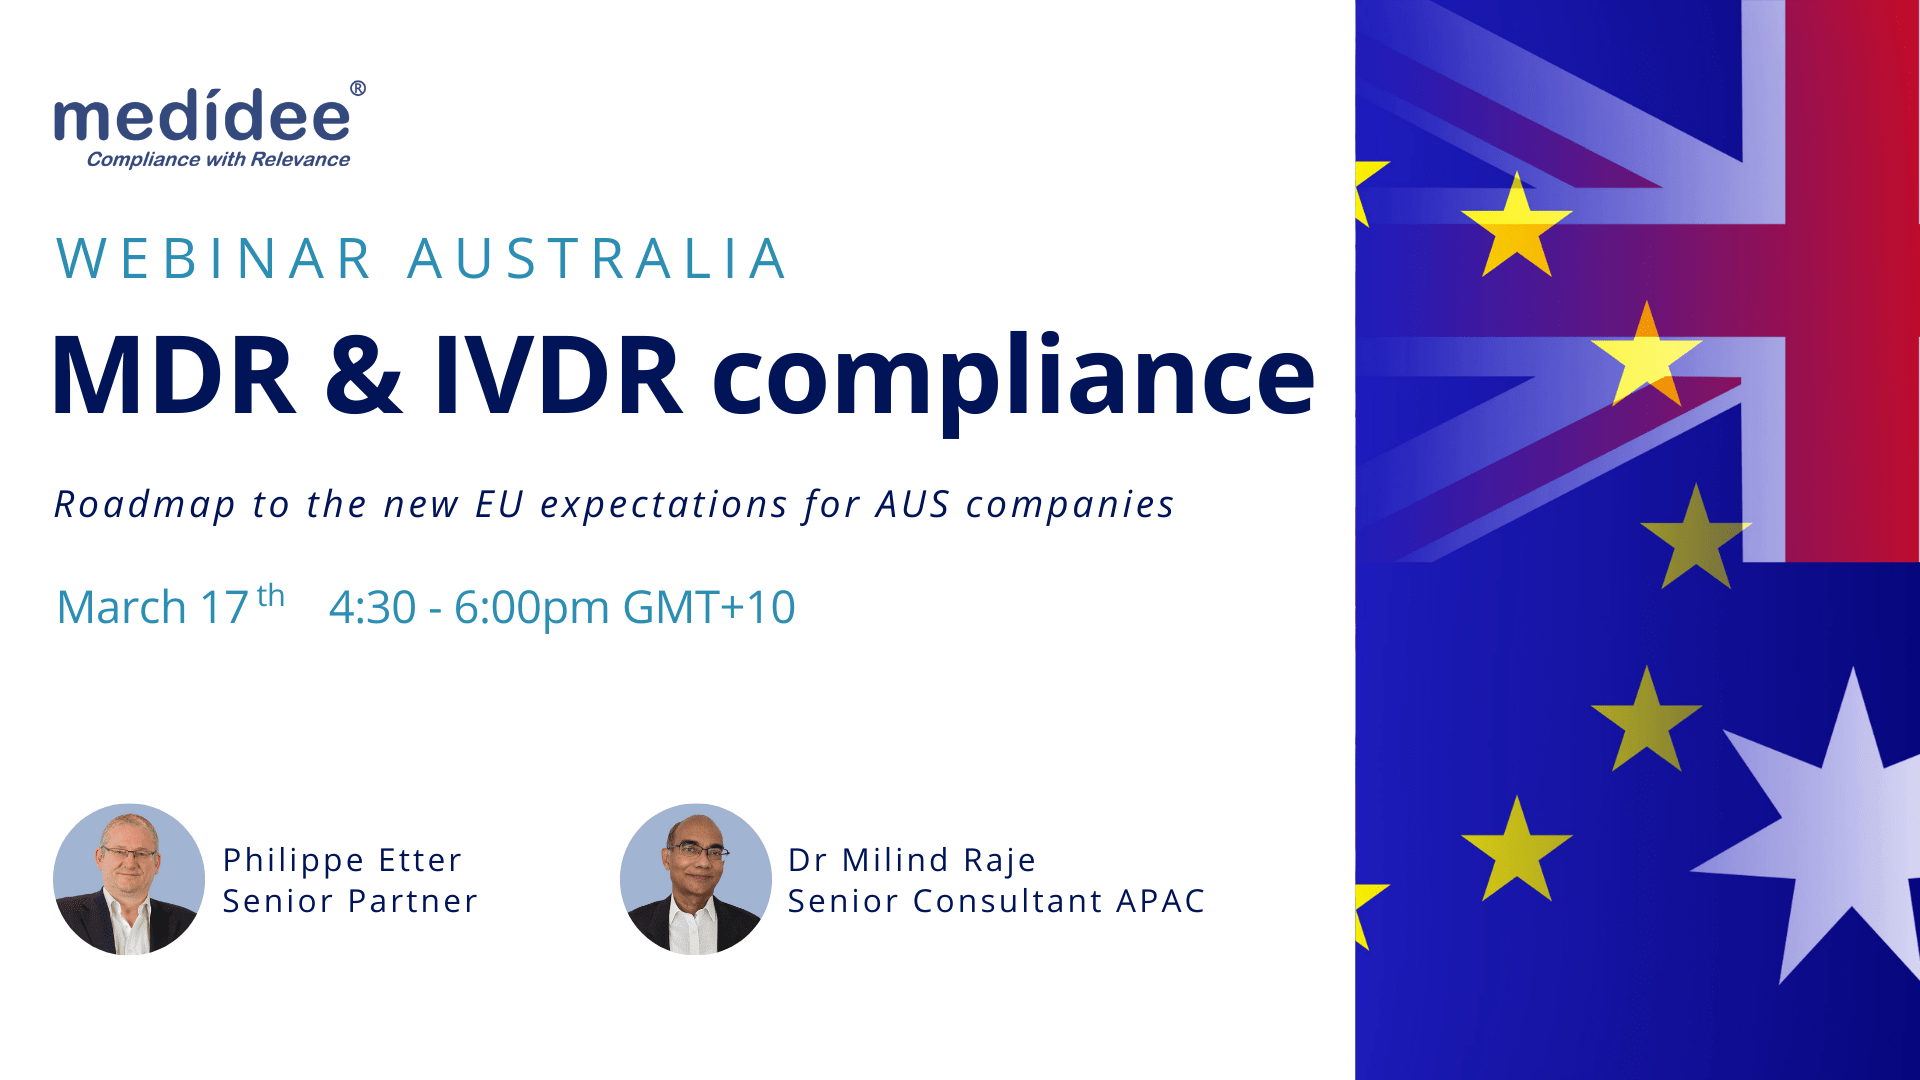 [WEBINAR] MDR & IVDR compliance for Australian companies - March 17th 2022